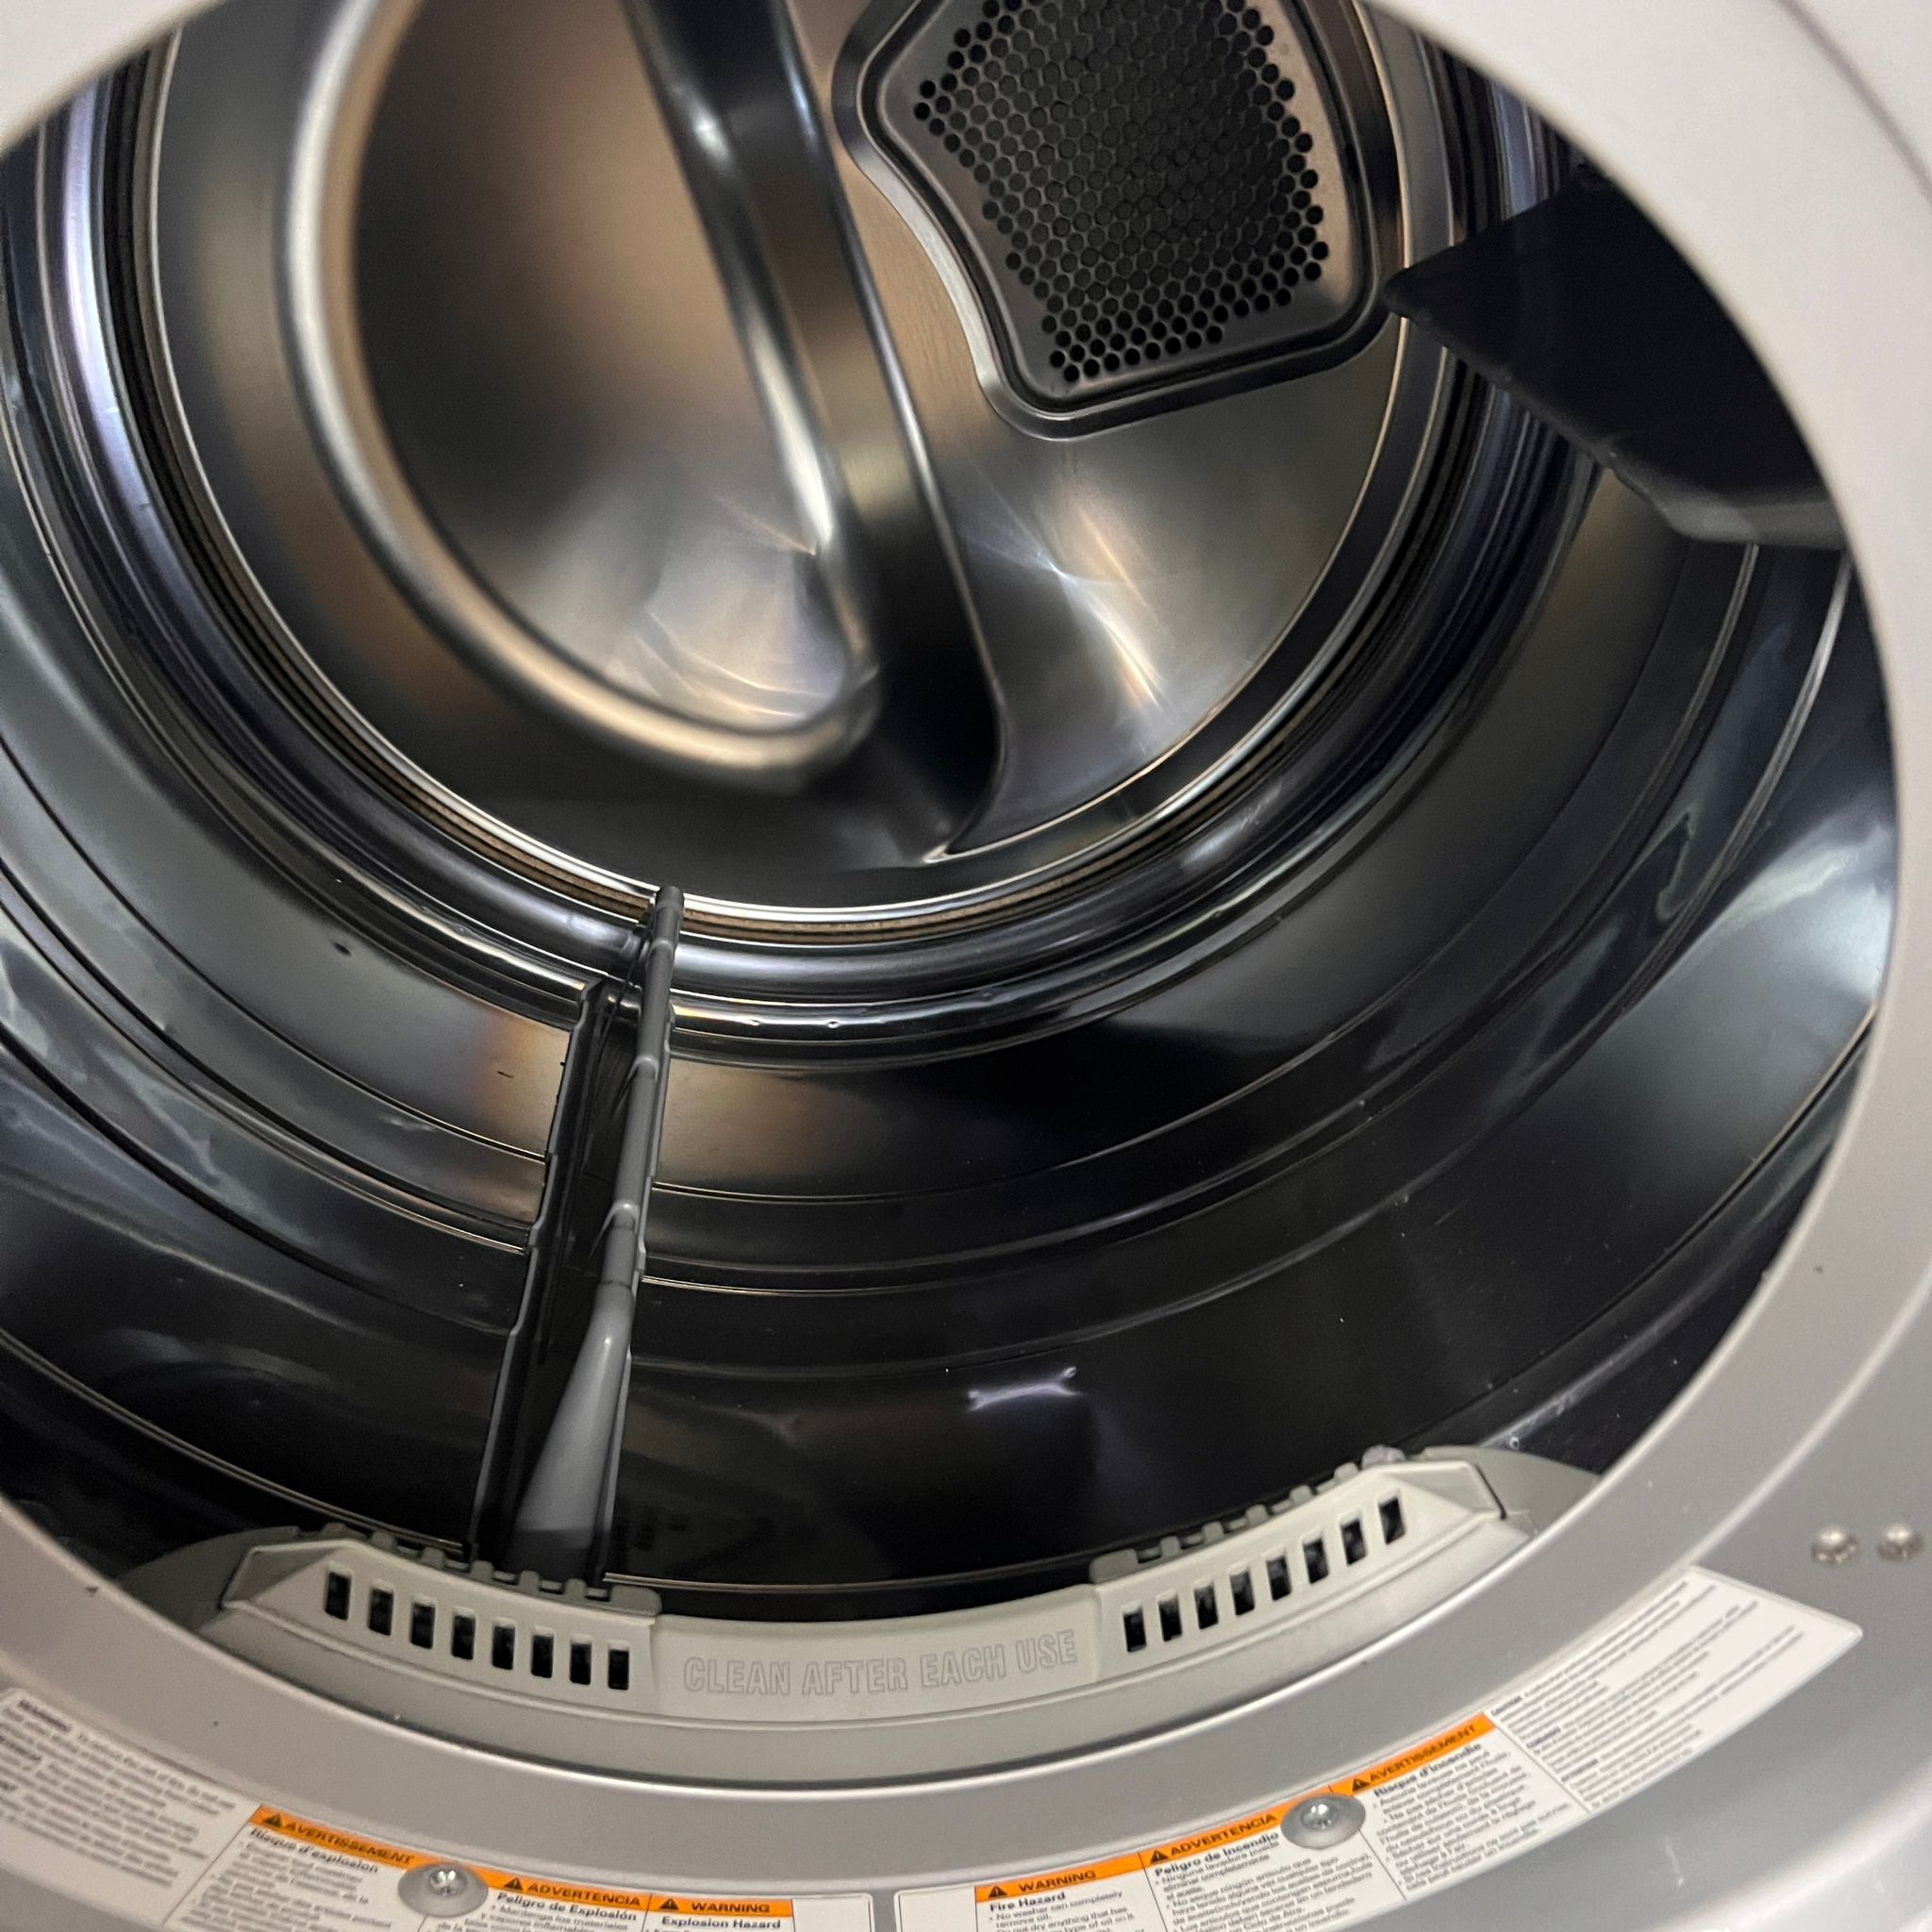 LG Washer and Dryer Front Load - Silver